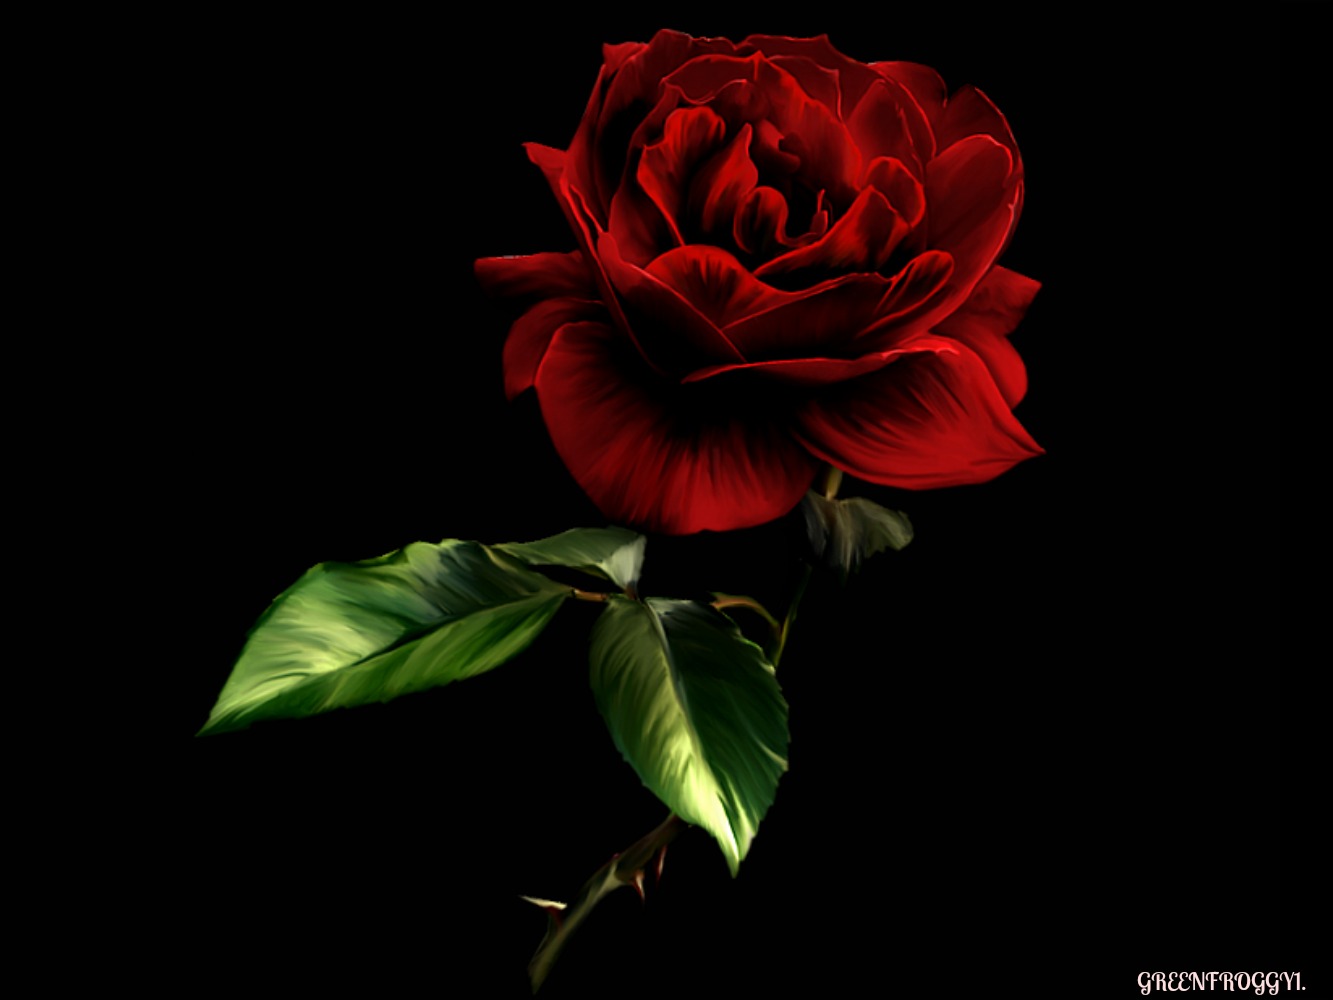 RED ROSE ON BLACK by GREENFROGGY1